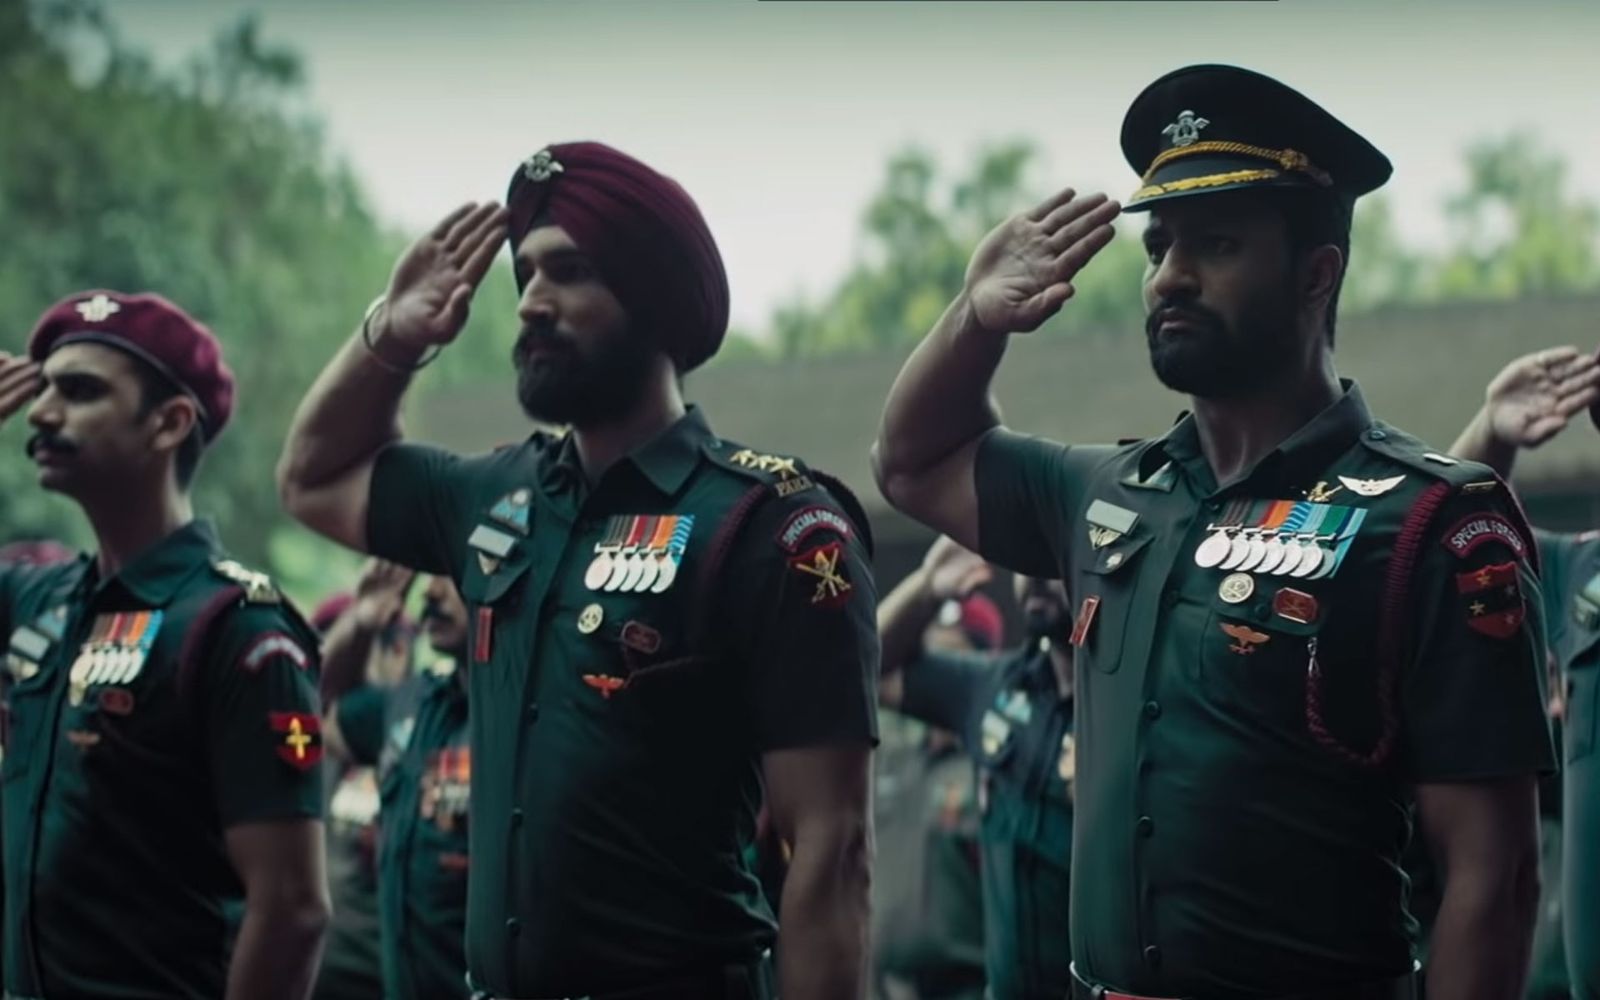 Wondering Why 2019 Film Uri: The Surgical Strike Was Considered For National Award This Year? Here’s The Answer